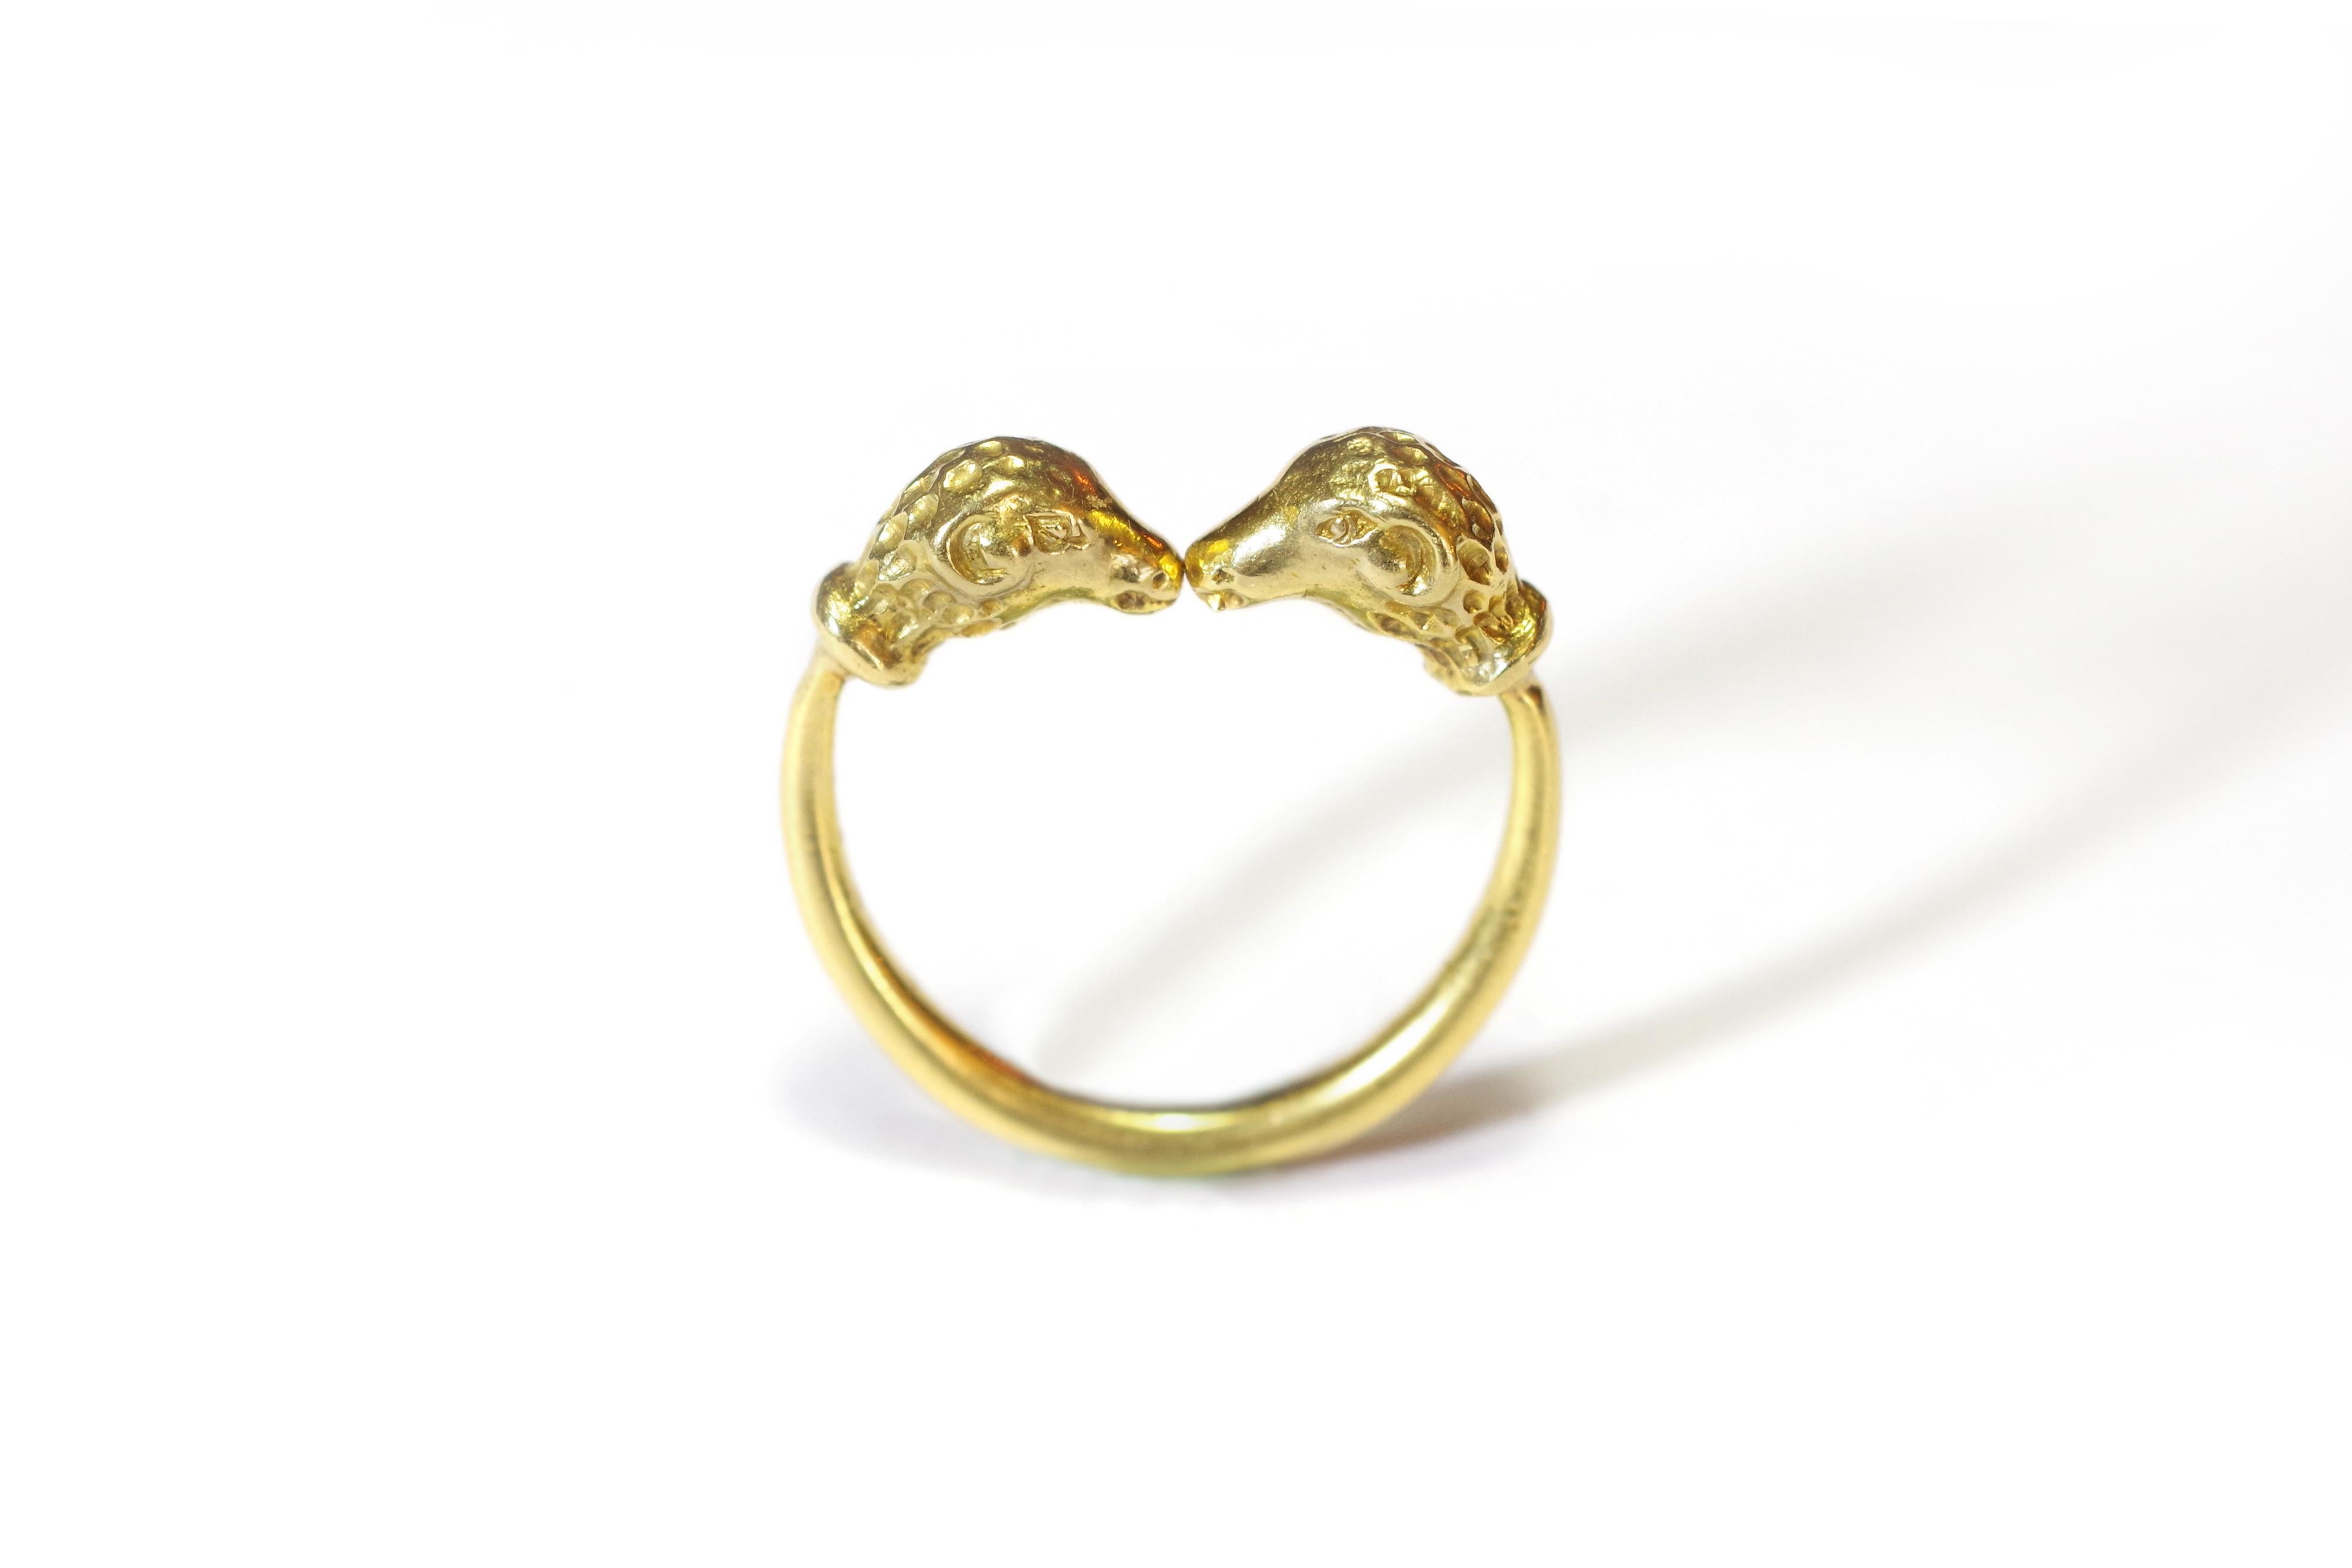 Torque Rams heads ring in 18 karats gold. Ring with double rams heads facing each other with a rich butter gold patina. The ring is plain gold. Antique style ring, circa 1940.
 
Camel head hallmark (1917-1940)

Finger size : 54 UE or 6.75 US